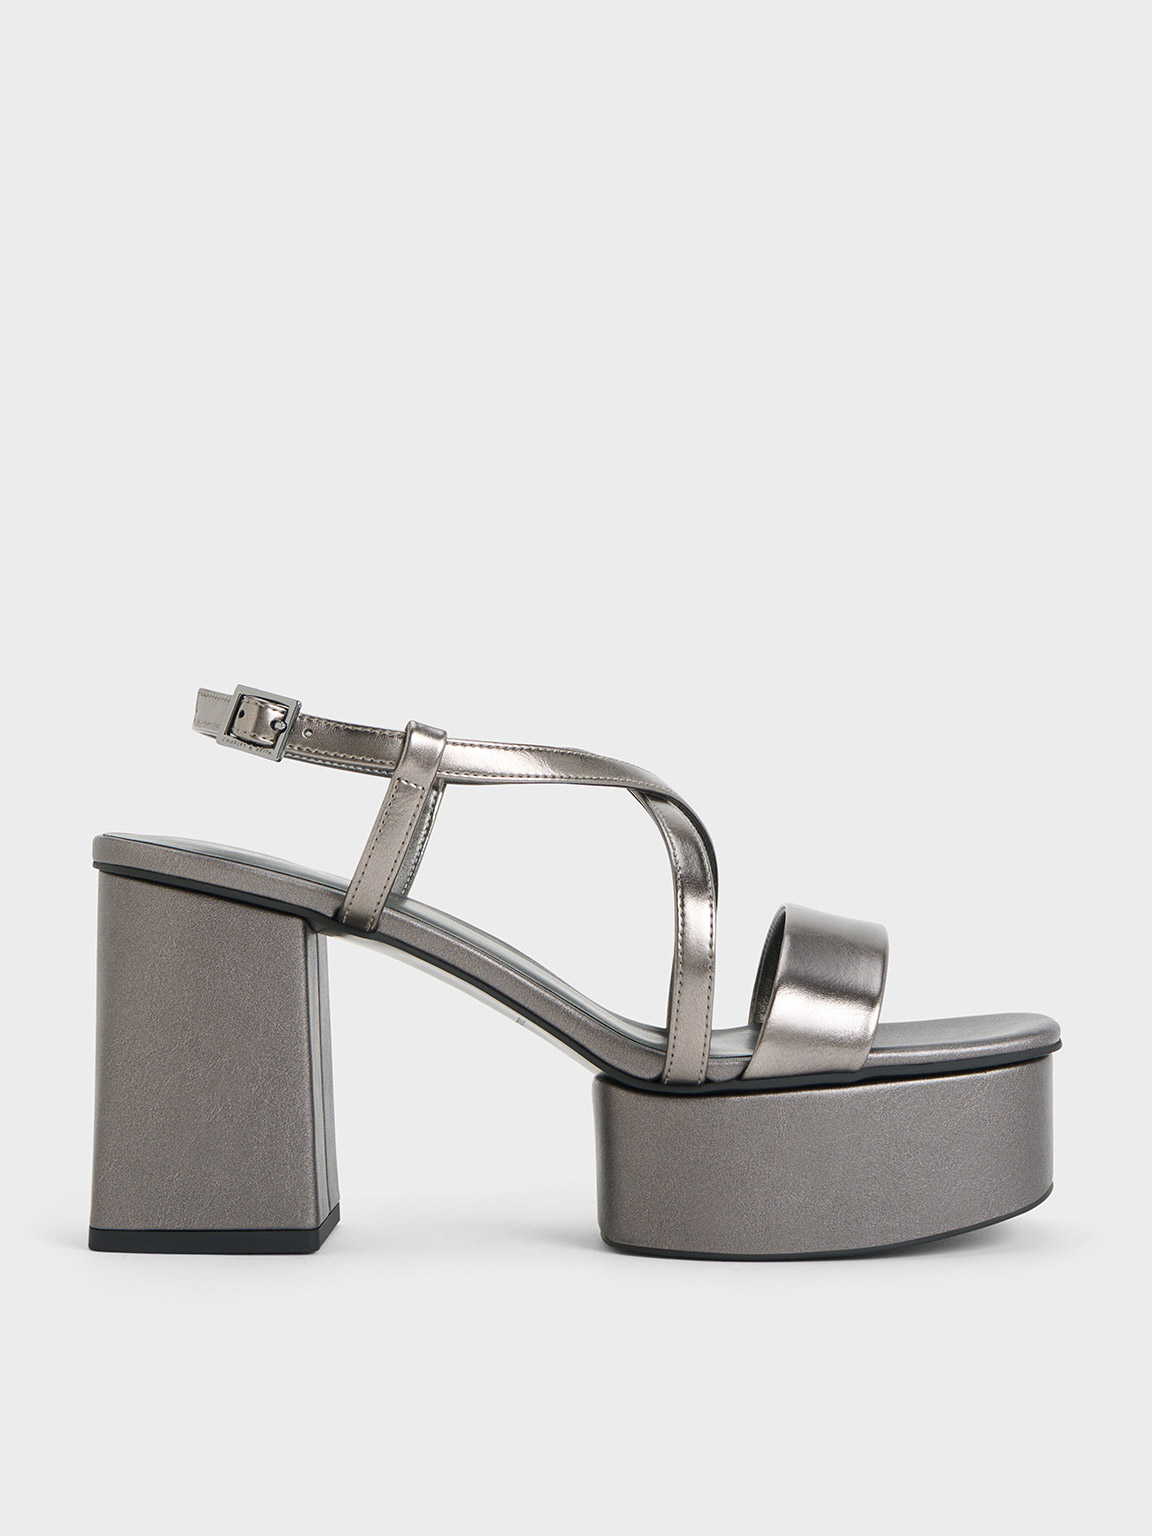 Silver Double Bow Platform Heeled Sandals by MACH & MACH on Sale